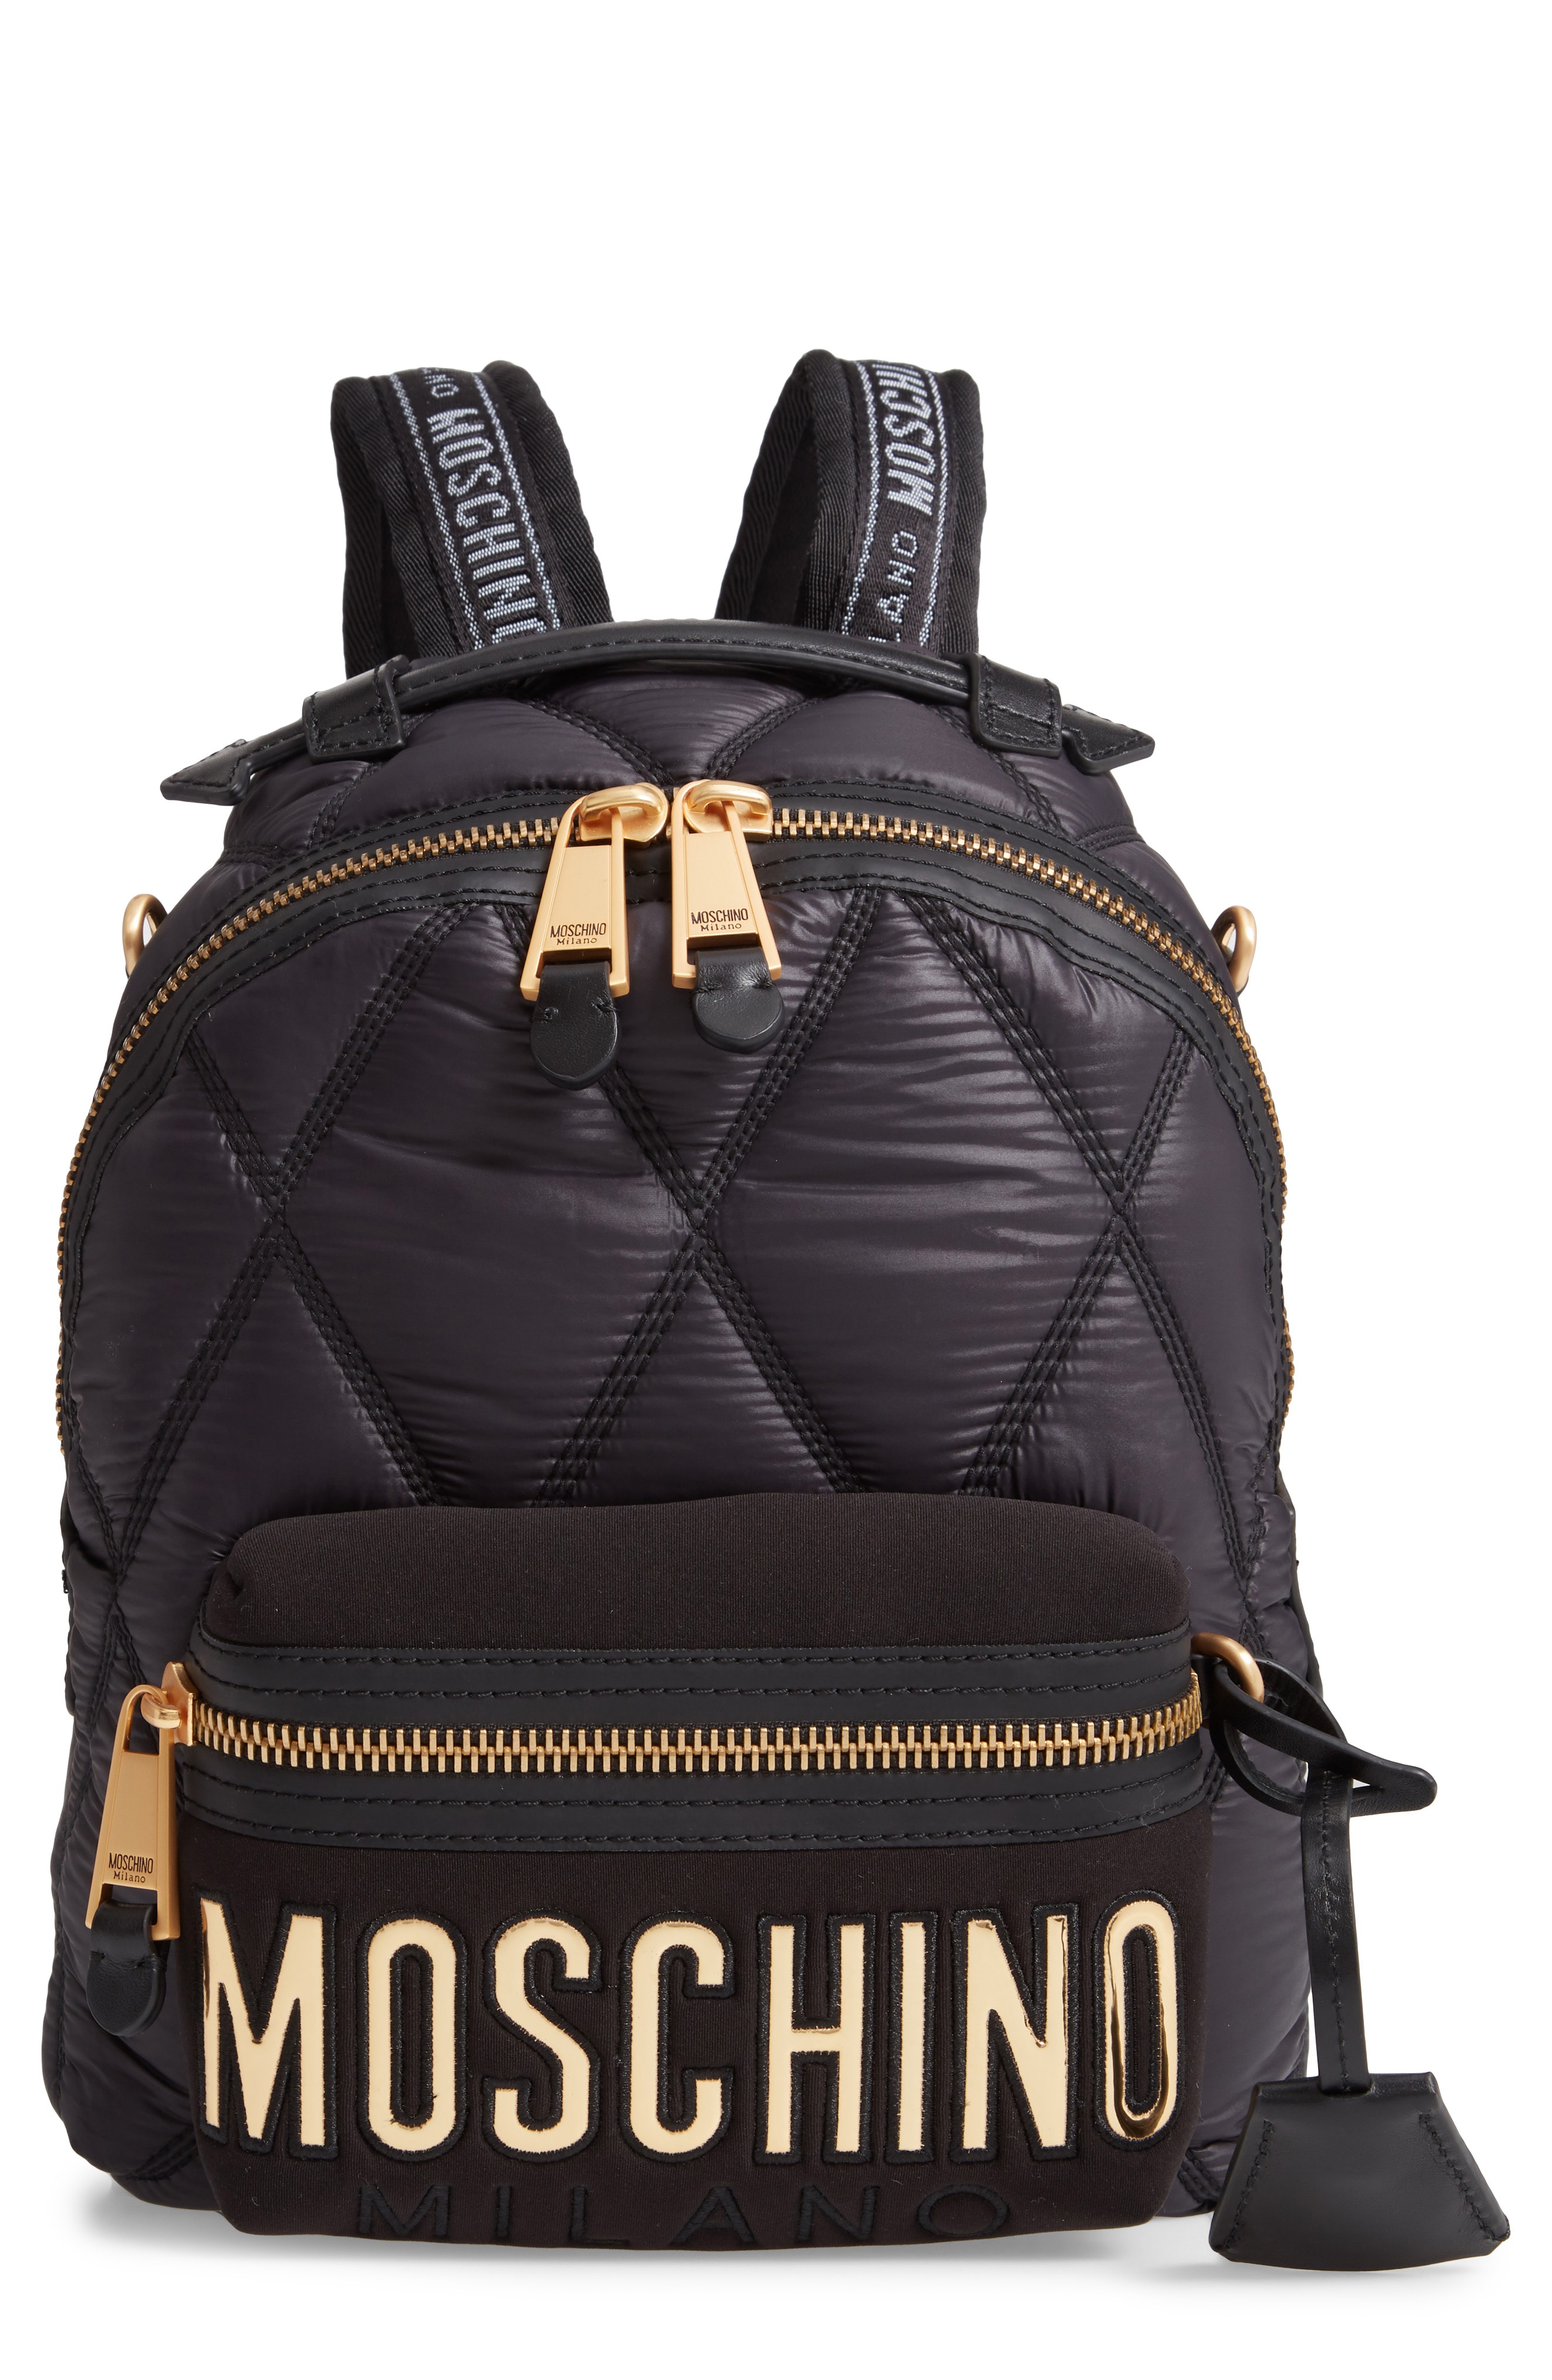 Moschino Quilted Nylon Backpack